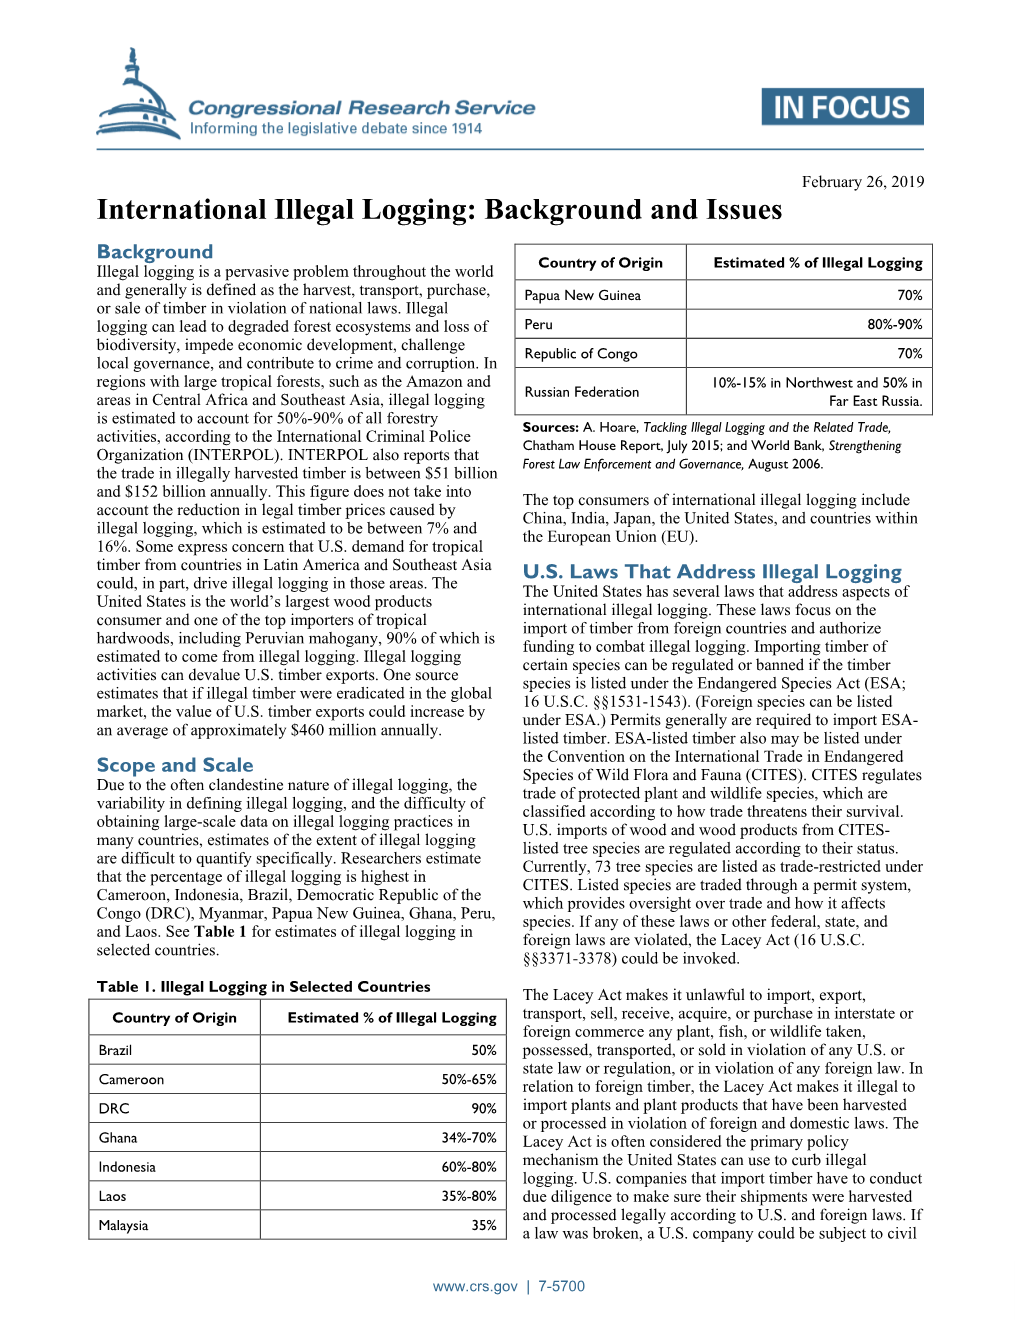 International Illegal Logging: Background and Issues